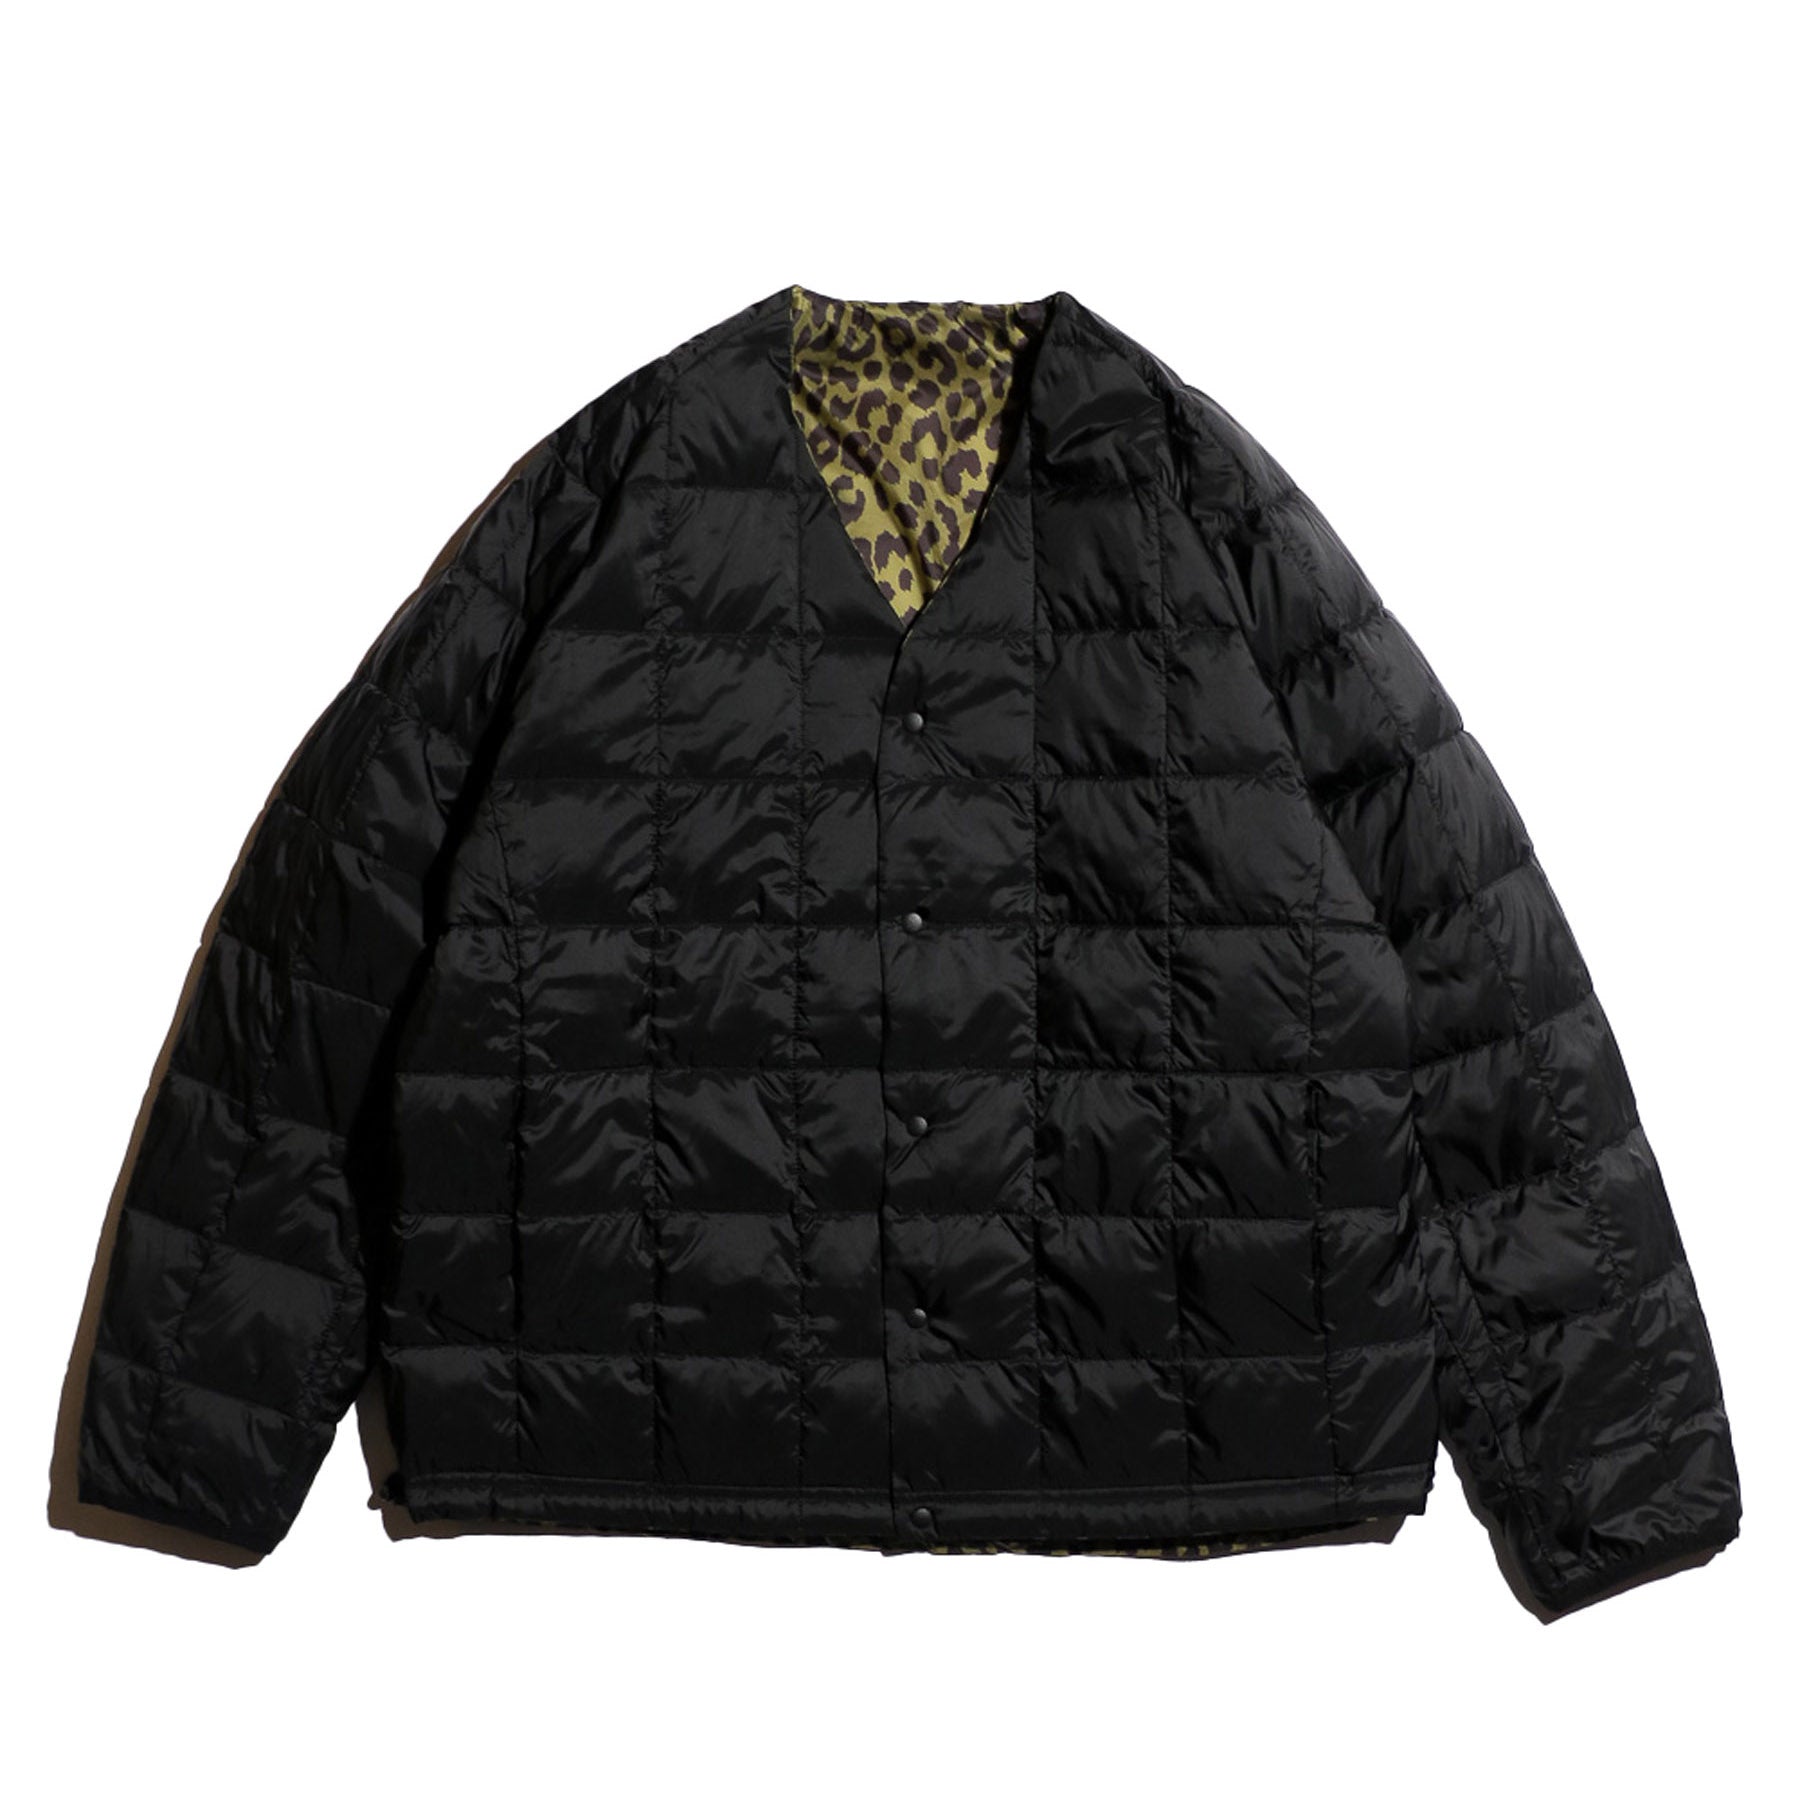 No:pn24f017tn_Leopard | Name:TAION & THE FOX Sports Cardigan | Color:Leopard【PENNYS_ぺニーズ】【入荷予定アイテム・入荷連絡可能】